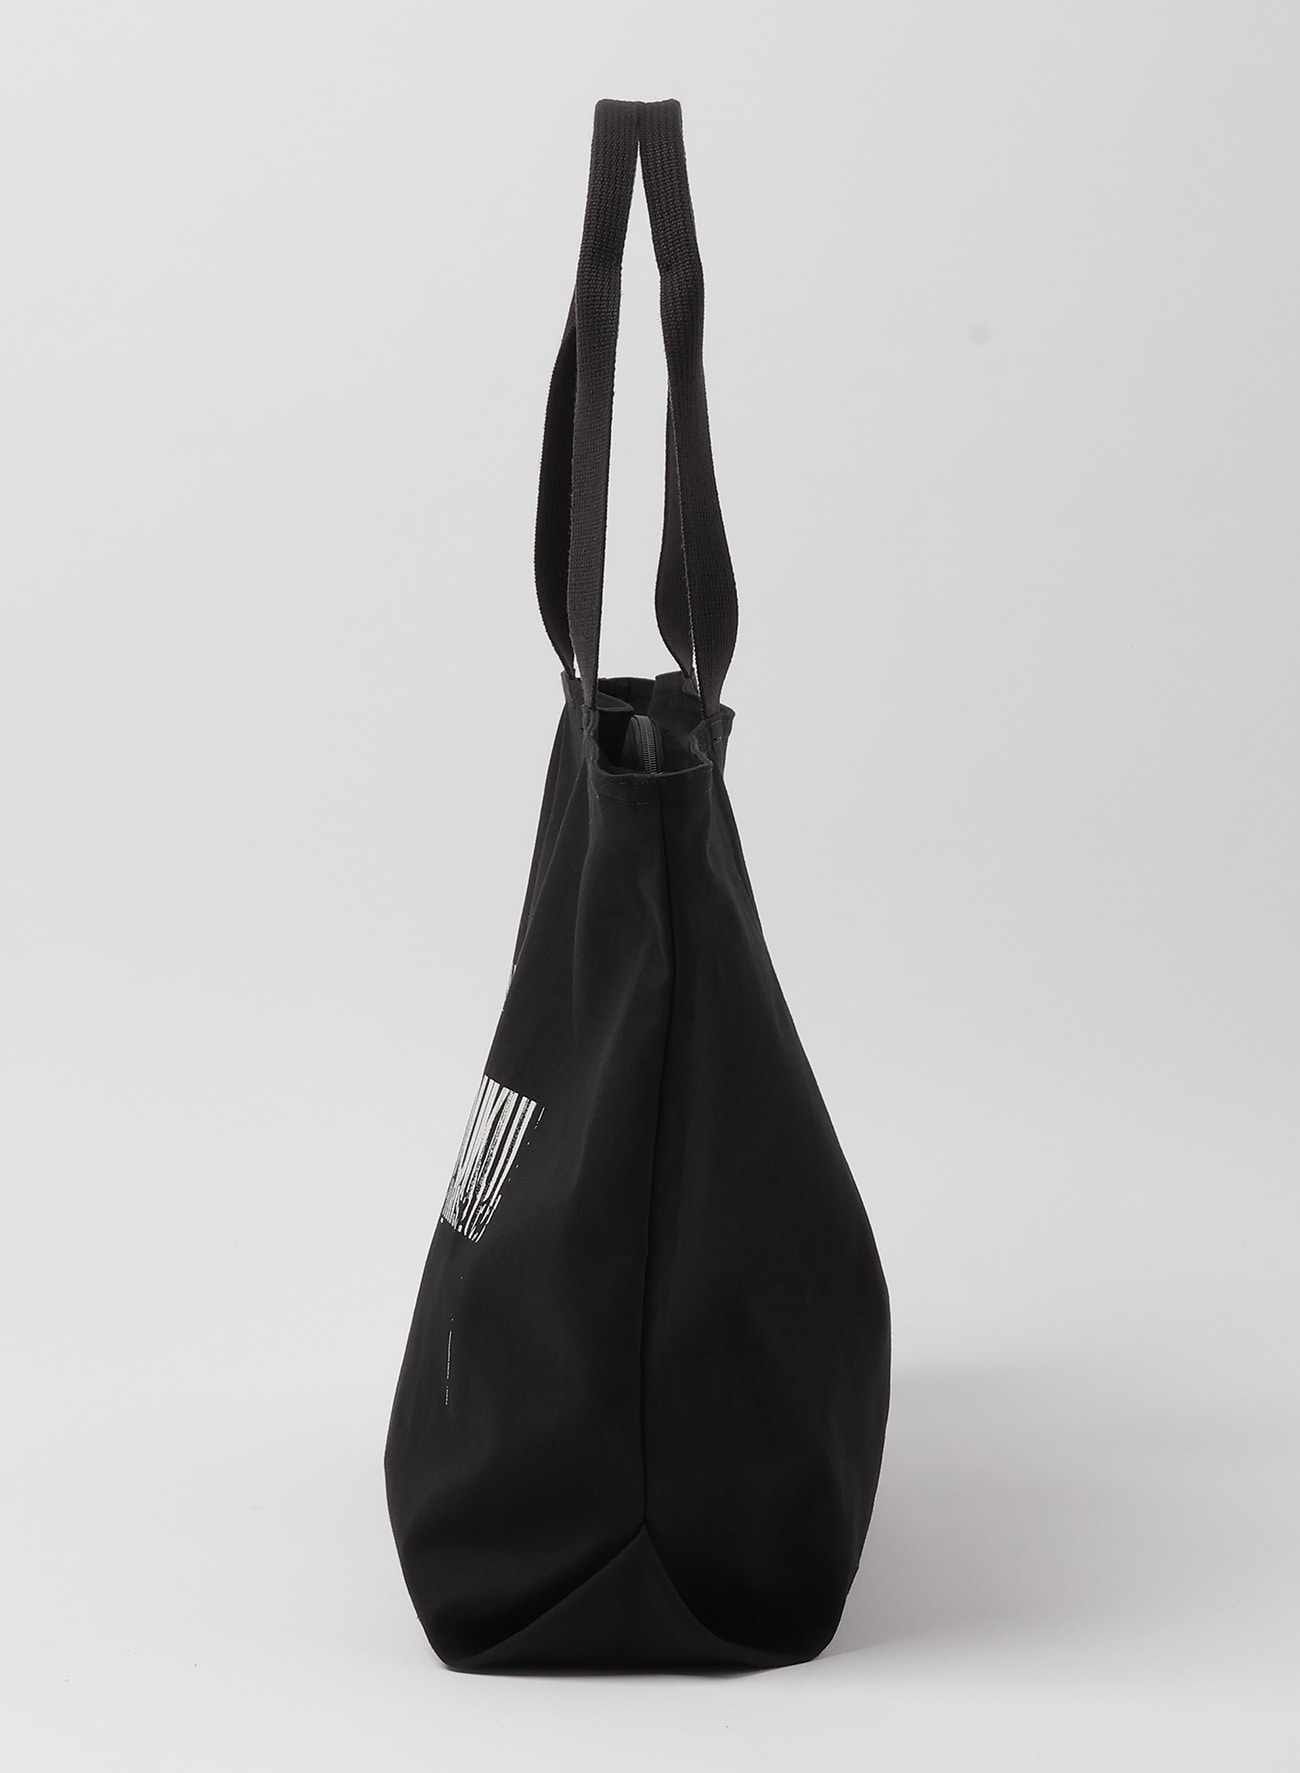 Y's x MAX VADUKUL] COTTON LEASE BAG(FREE SIZE Black): Y's｜THE 